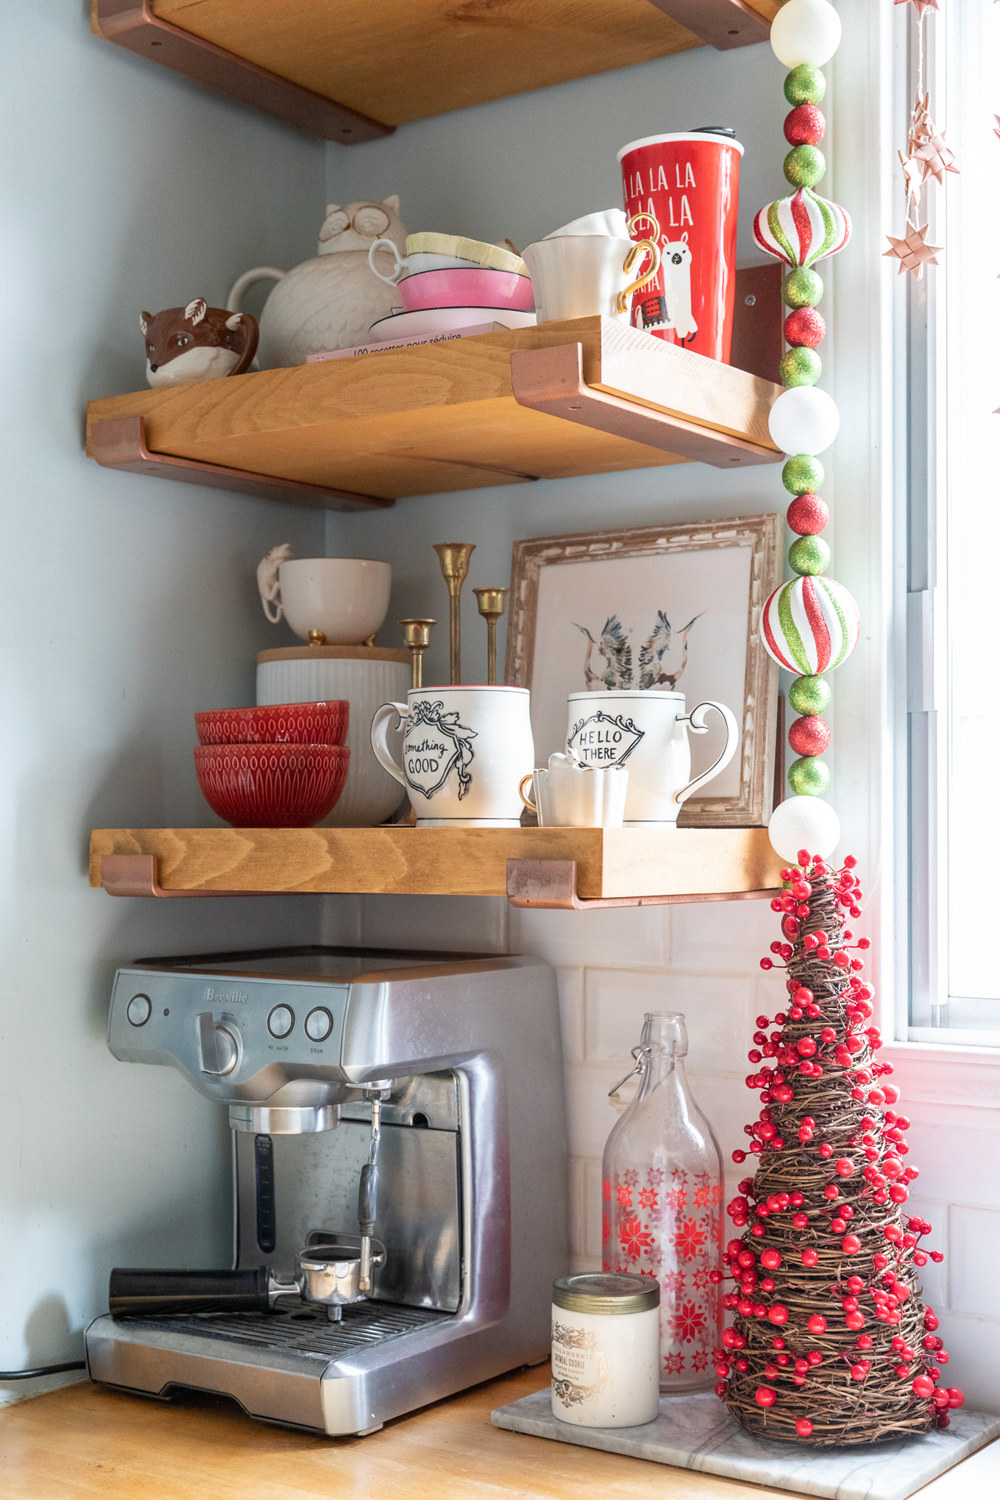 Kitchen countertop with a tiny wicker Christmas tree for decor